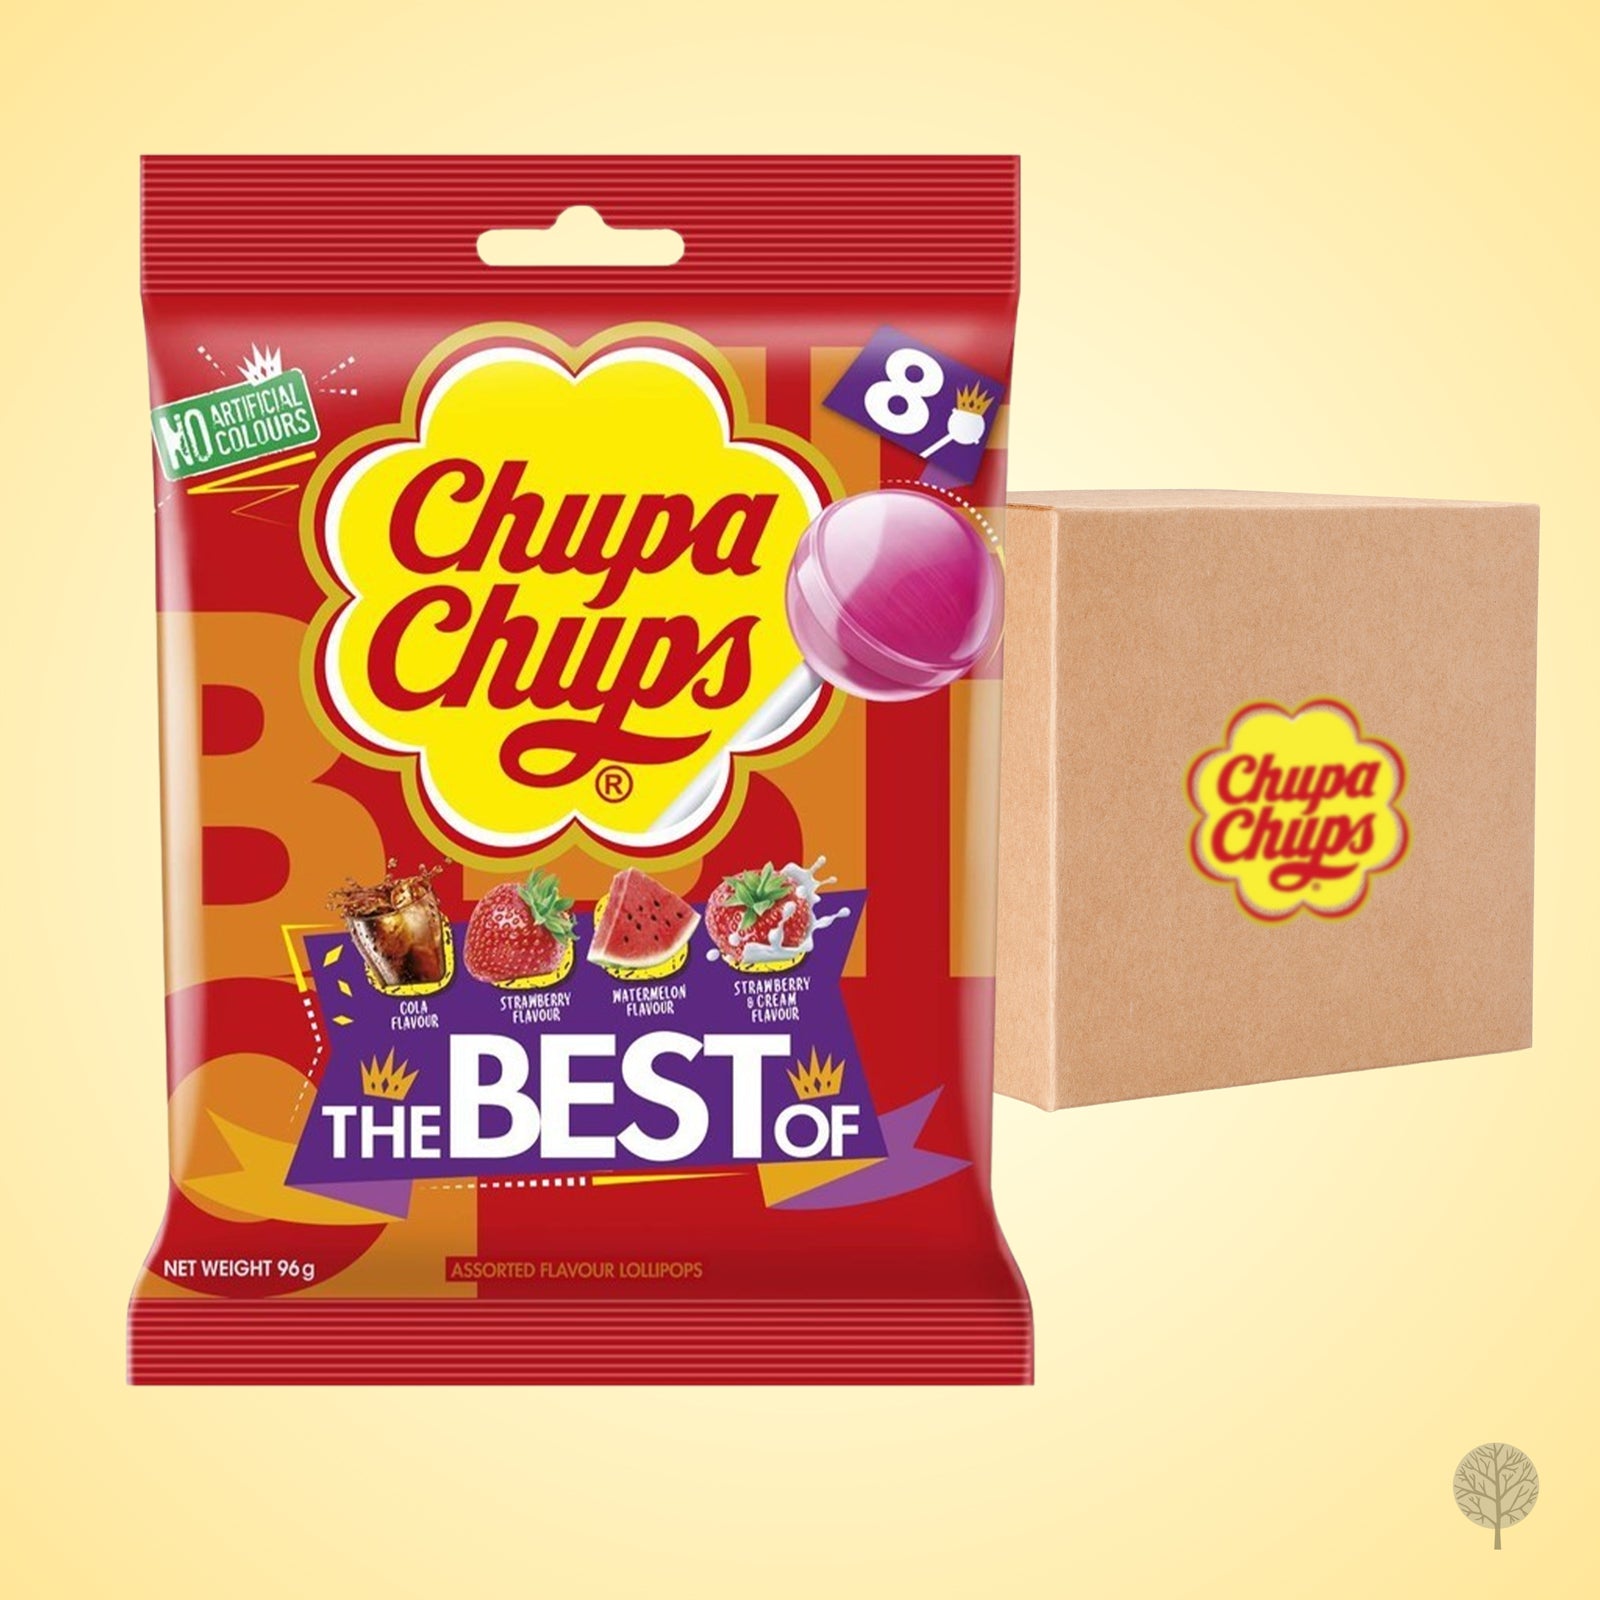 The sweet journey of Chupa Chups: 4 lessons for Designers and